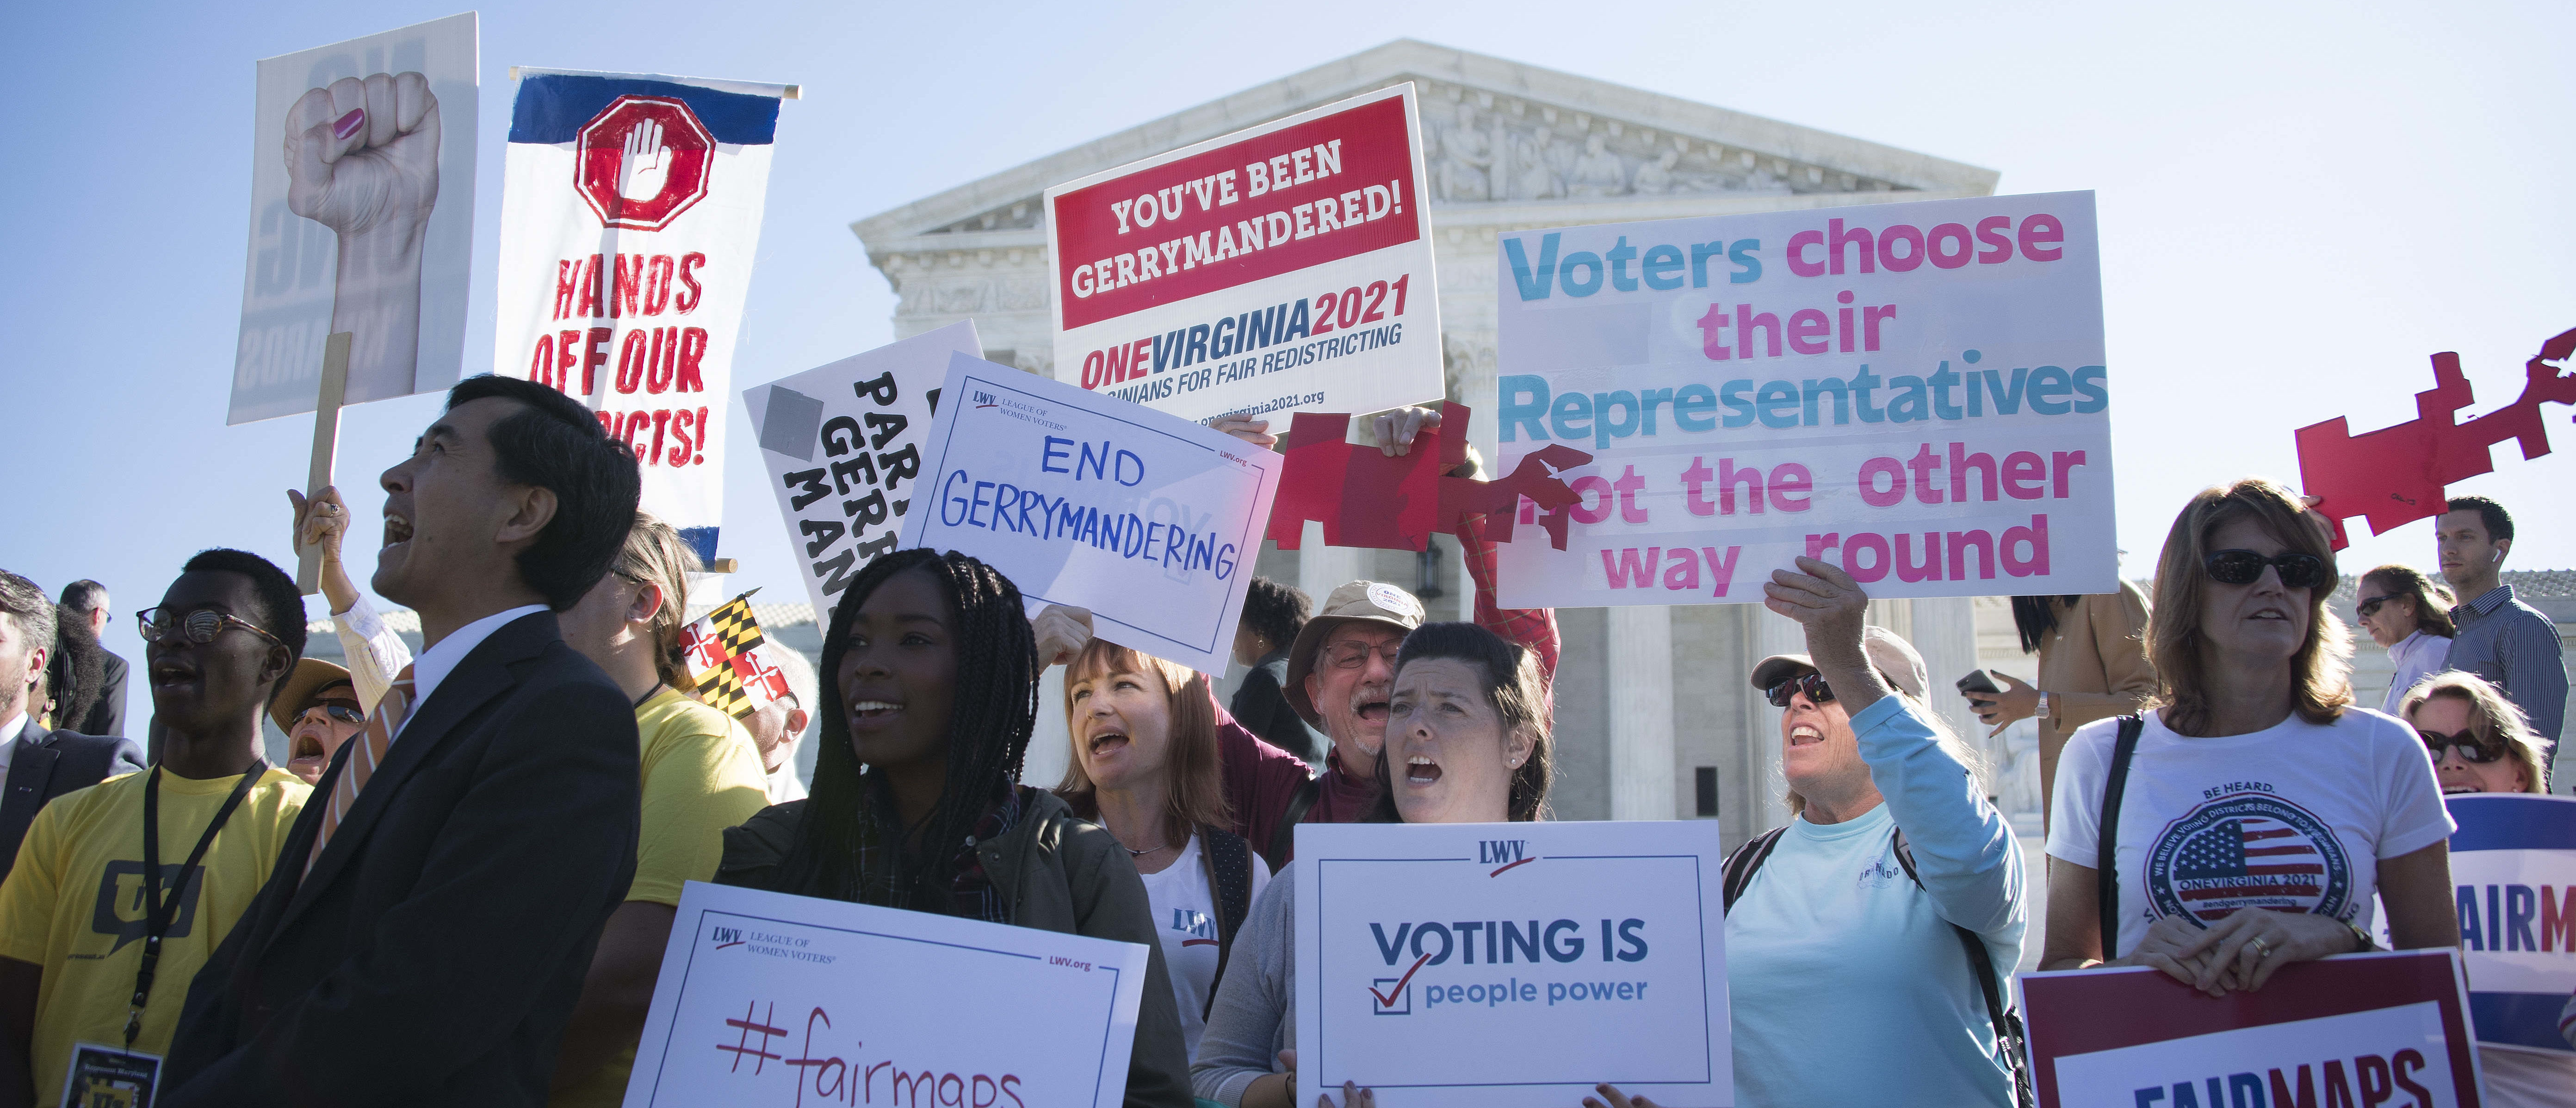 The Supreme Court Handed Down A Big Decision On Partisan Gerrymandering